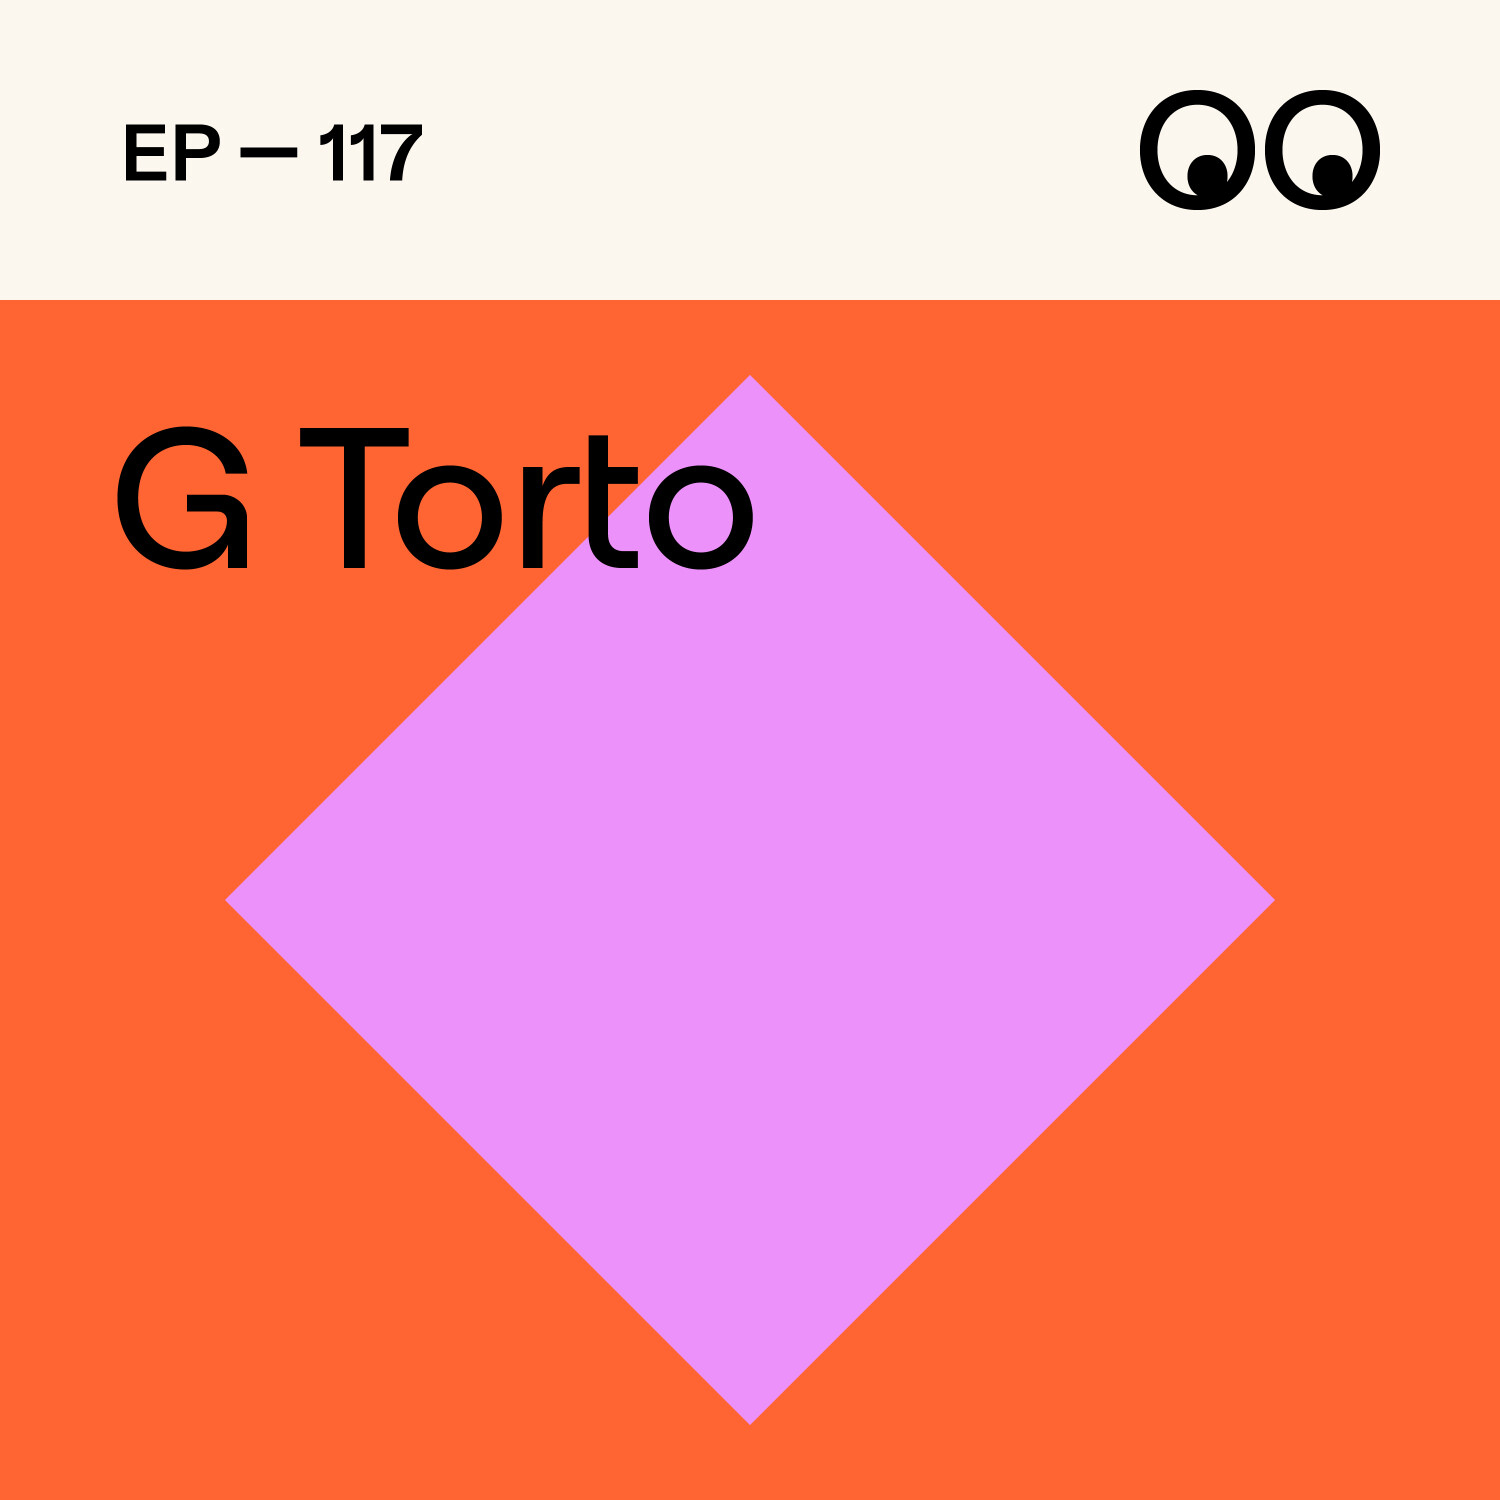 Branding brilliance and crafting iconic identities at Koto, with G Torto